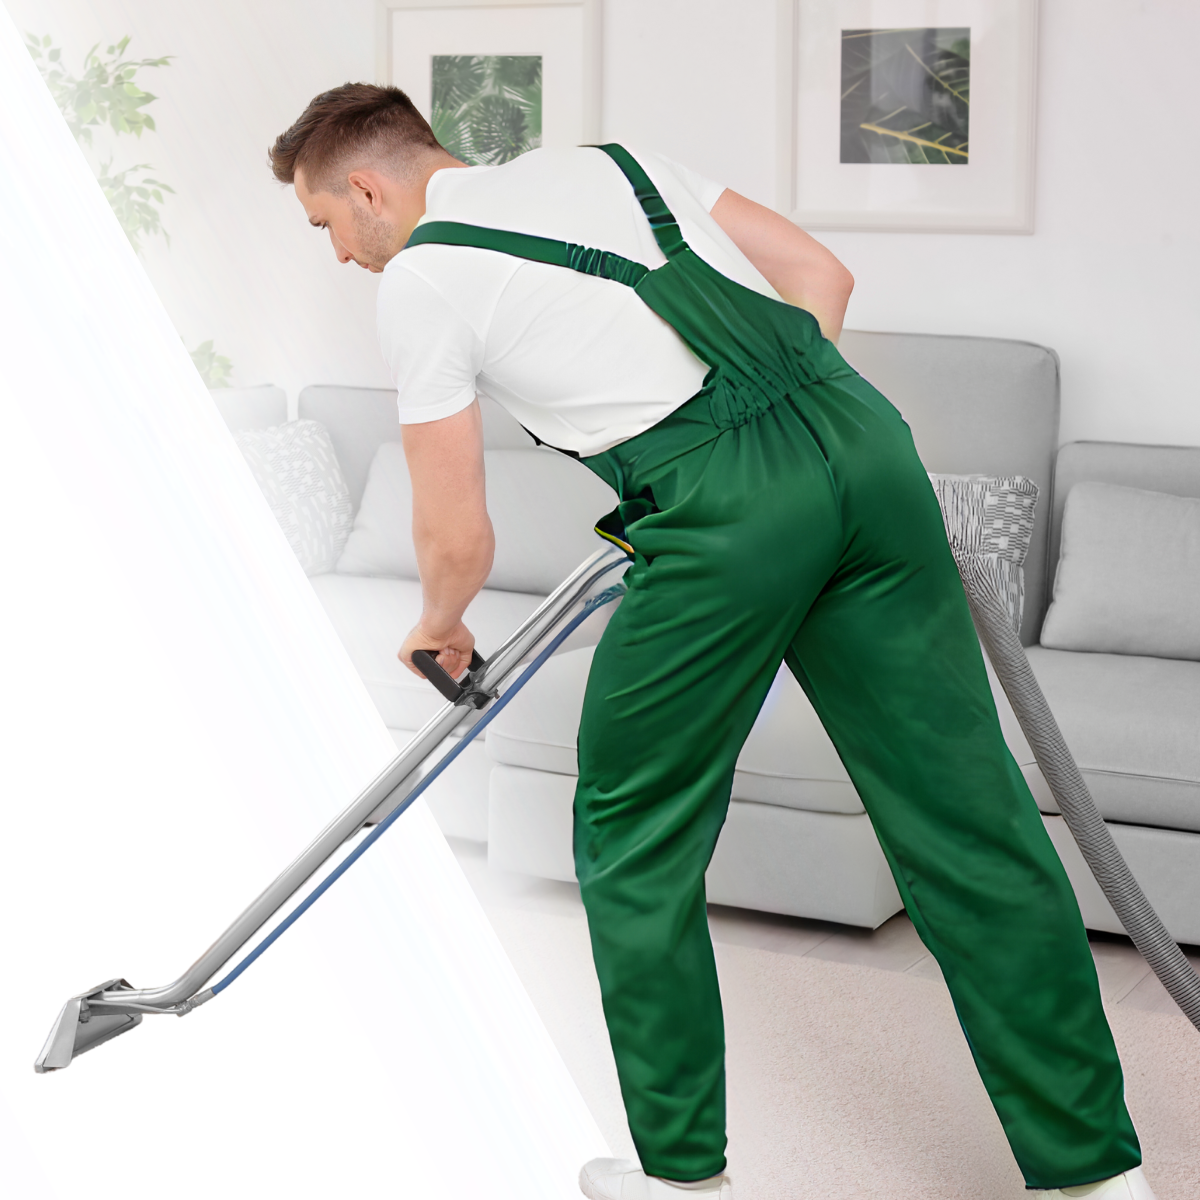 carpet cleaning manchester image 105